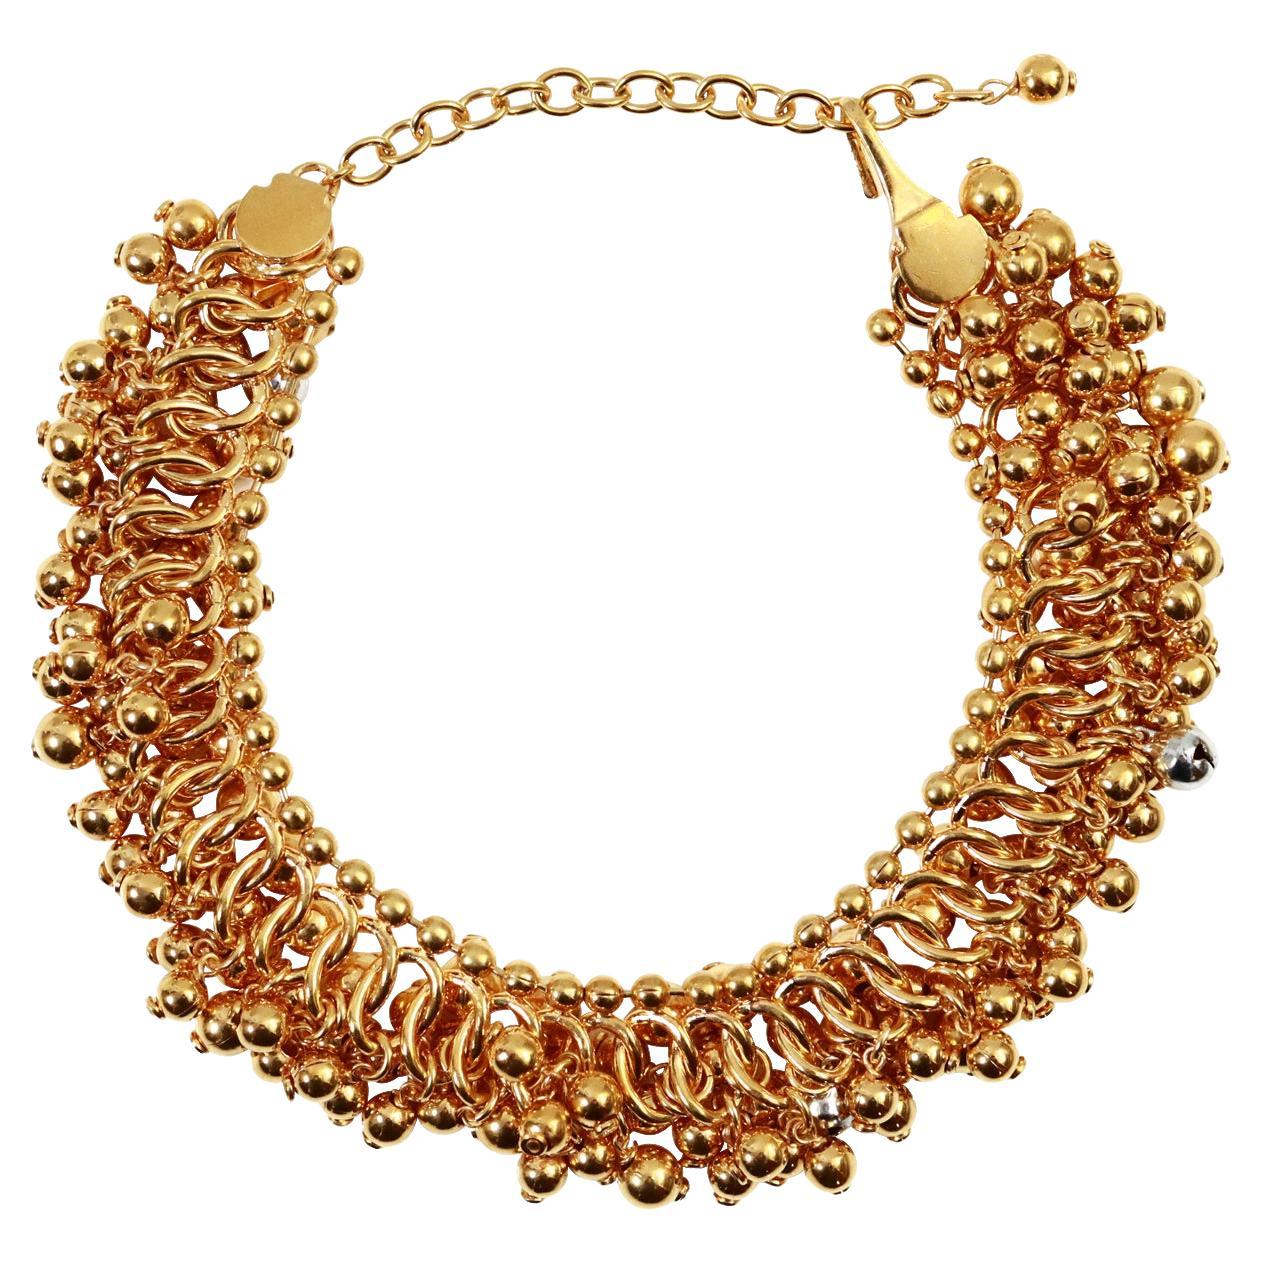 Vintage Dior Gold Choker Necklace with Dangling Balls Circa 2000 In Excellent Condition For Sale In New York, NY